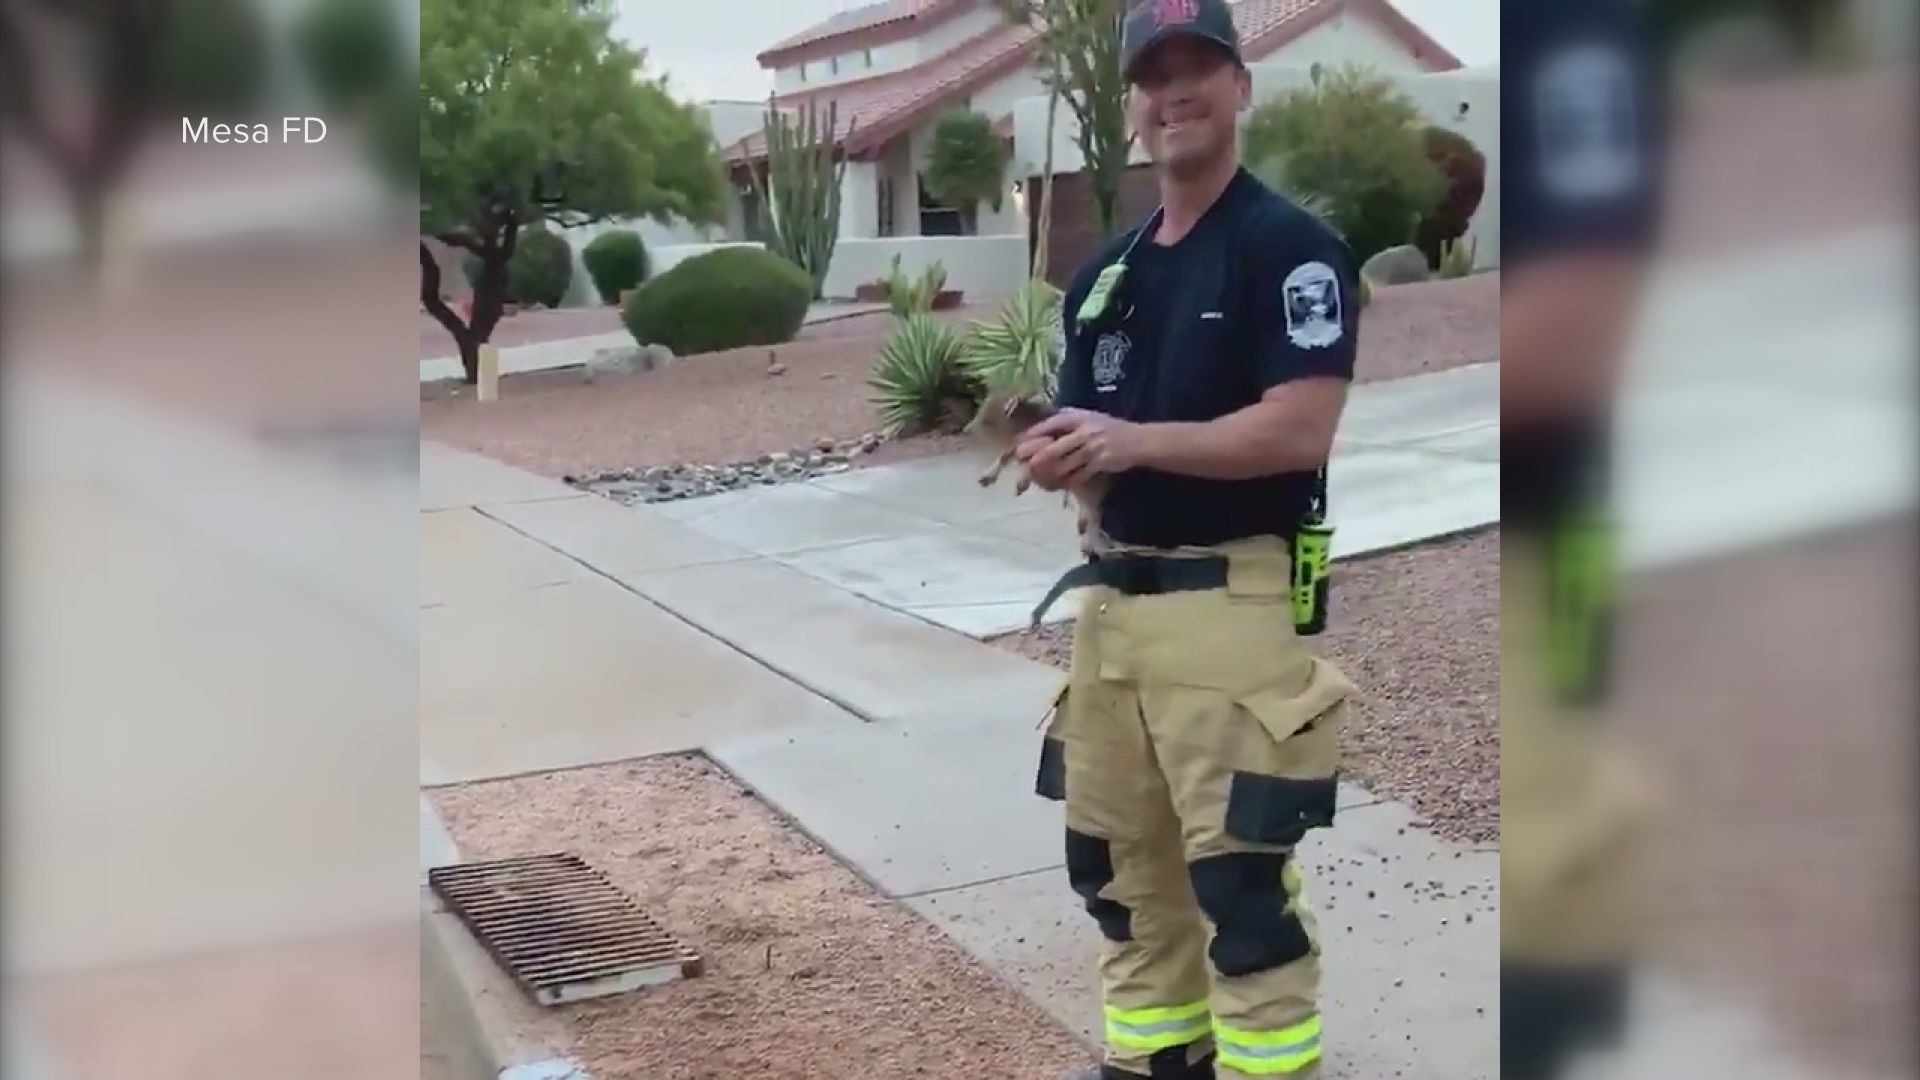 Mesa firefighters rescued two young javelinas that fell through a storm drain grate. Arizona Game and Fish stepped in to help because the two appear to be orphaned.